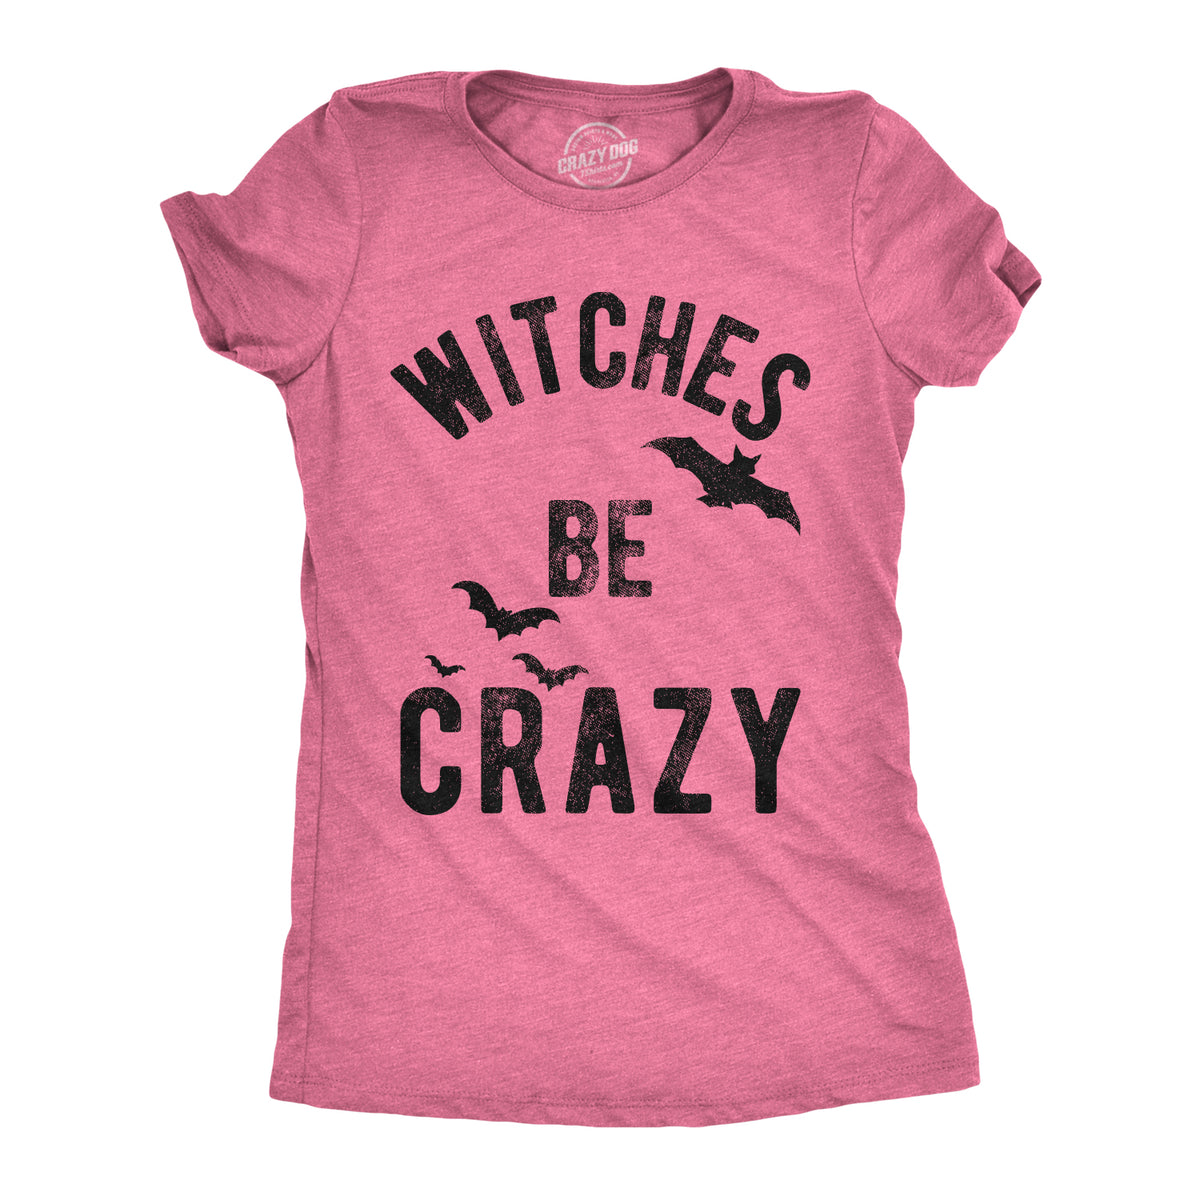 Funny Heather Pink Witches Be Crazy Womens T Shirt Nerdy Halloween Tee